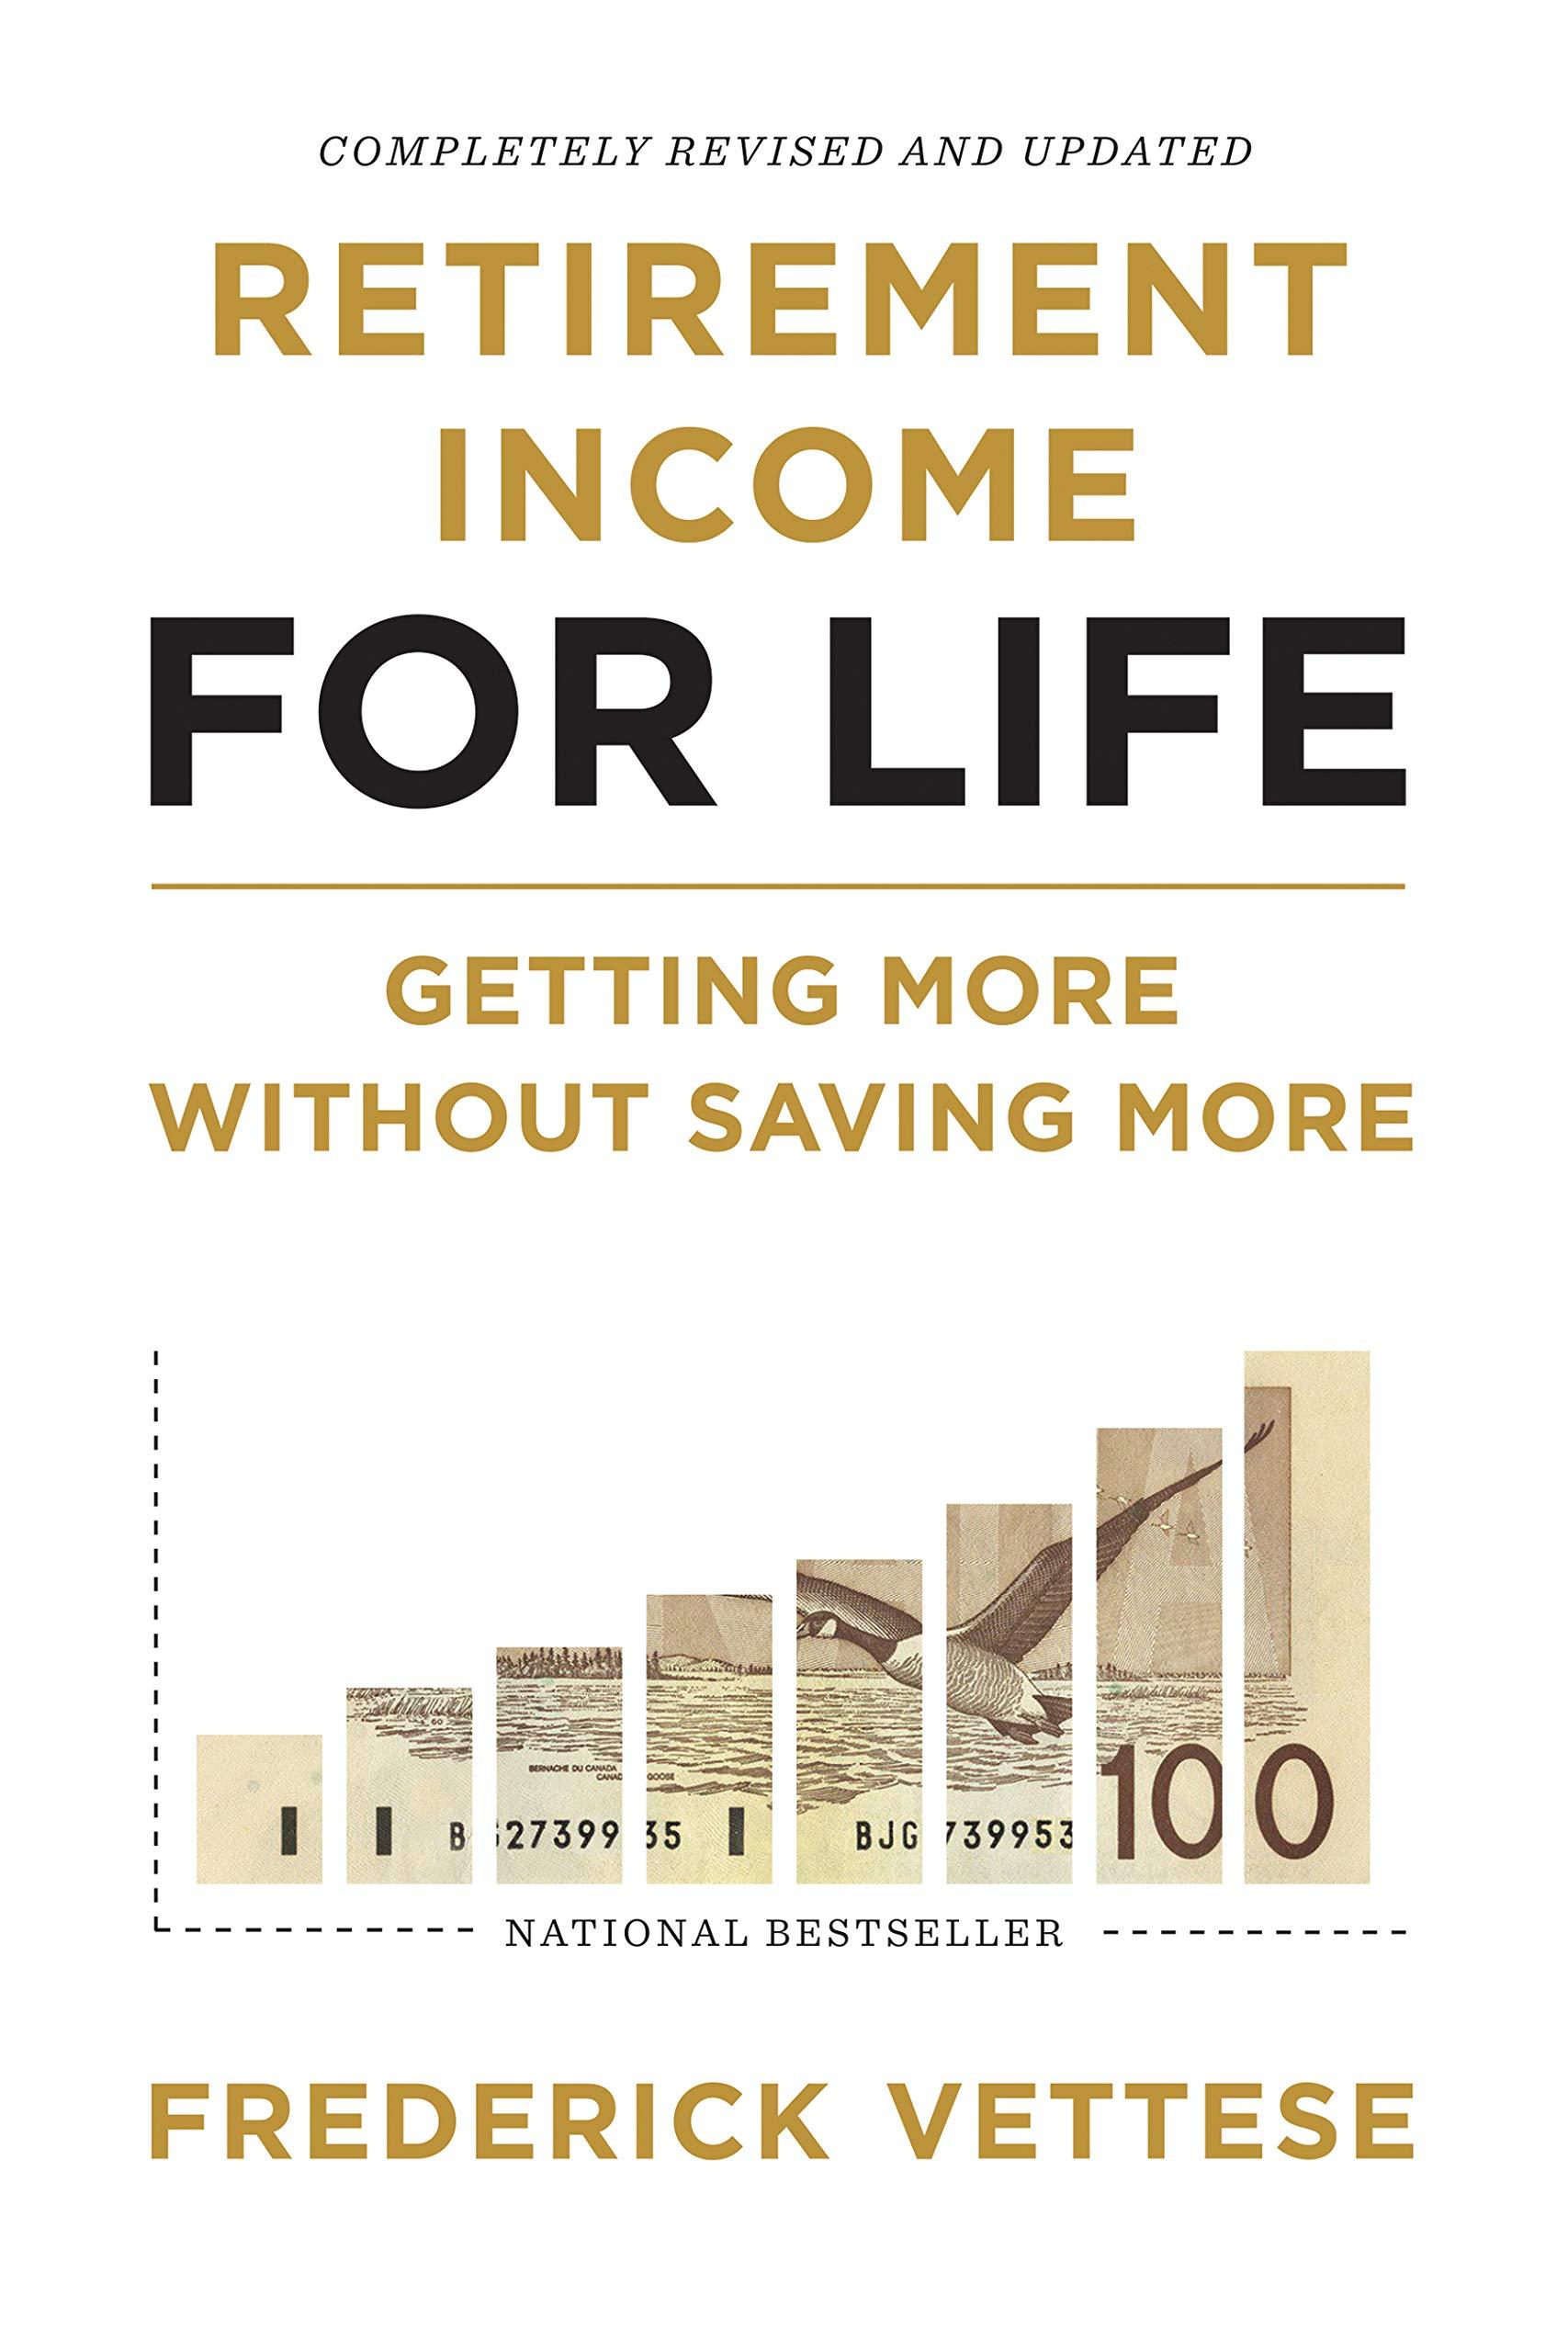 retirement income for life getting more without saving more 2nd edition frederick vettese 1770416021,